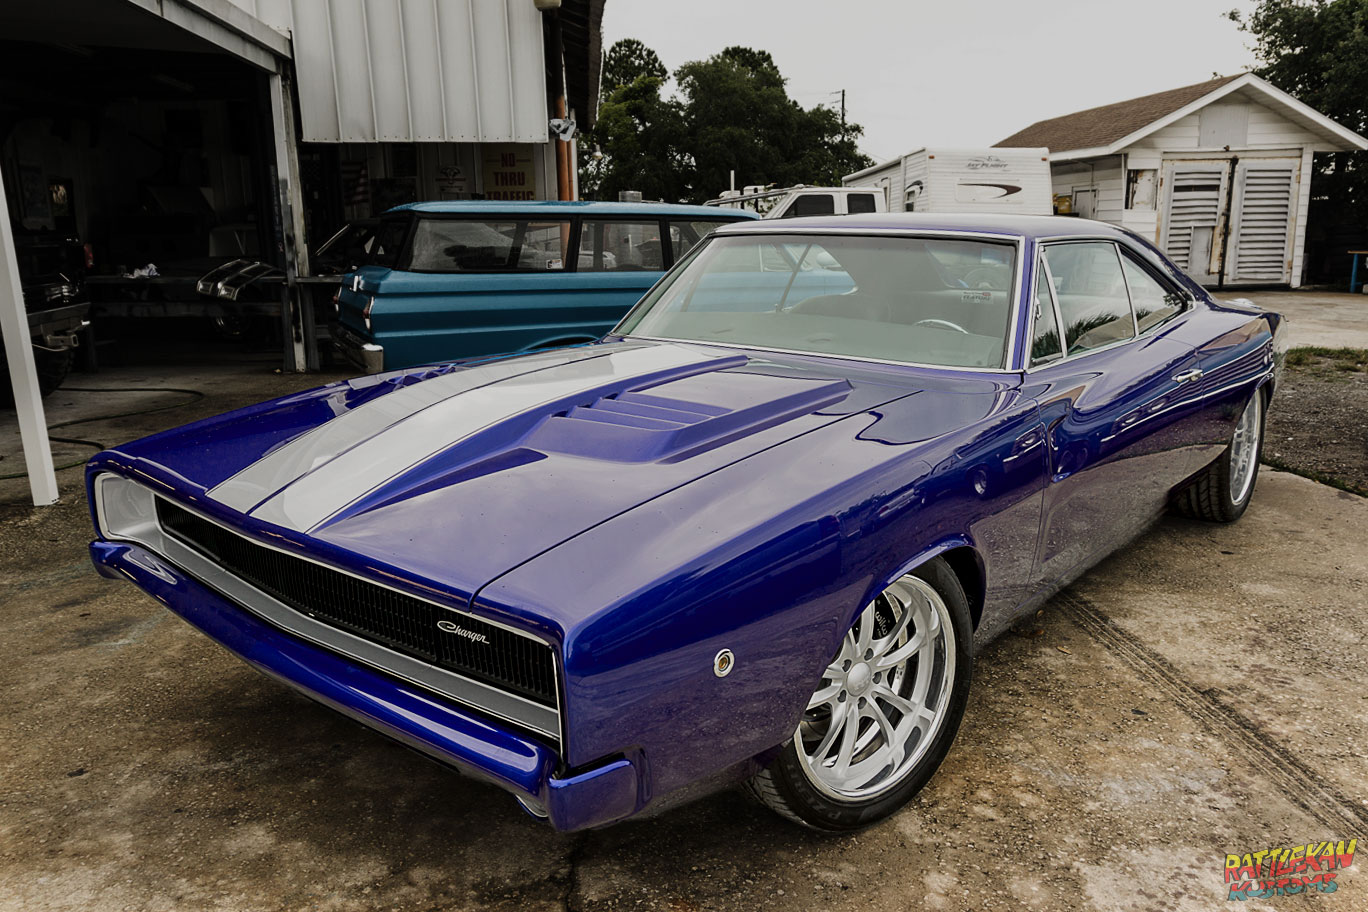 Dodge Charger painted by RattleKan Kustoms in Melbourne FL